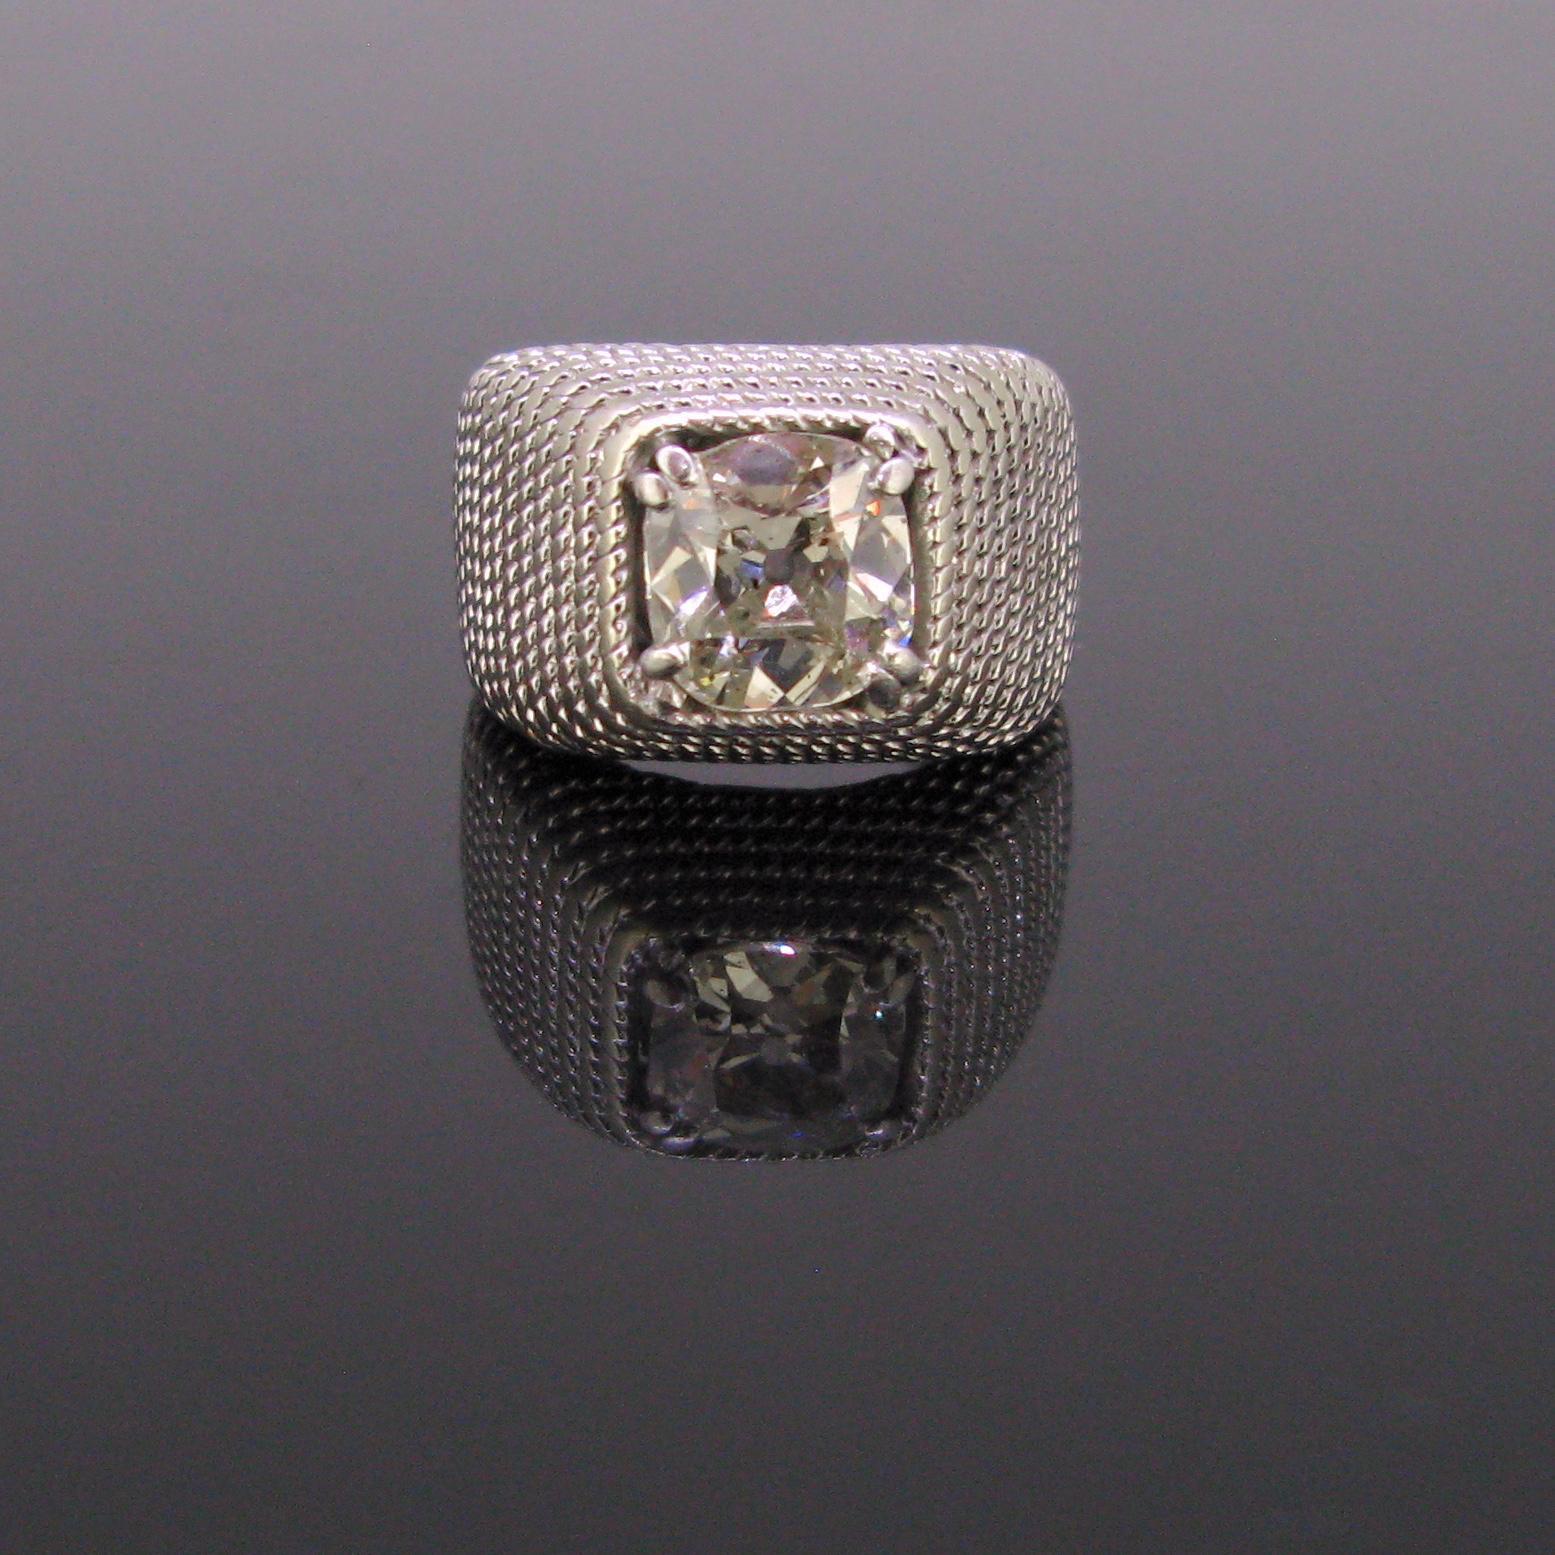 Weight:	13,01gr


Metal:	18kt white Gold 


Stones:	1 Diamond
•	Cut:	Square Cushion
•	Carat:	1.60ct approximately 
•	Colour:	I/J
•	Clarity:	SI2/P1


Condition:	Very Good


Comments:	This bold signet ring from the Thirties is set with a square